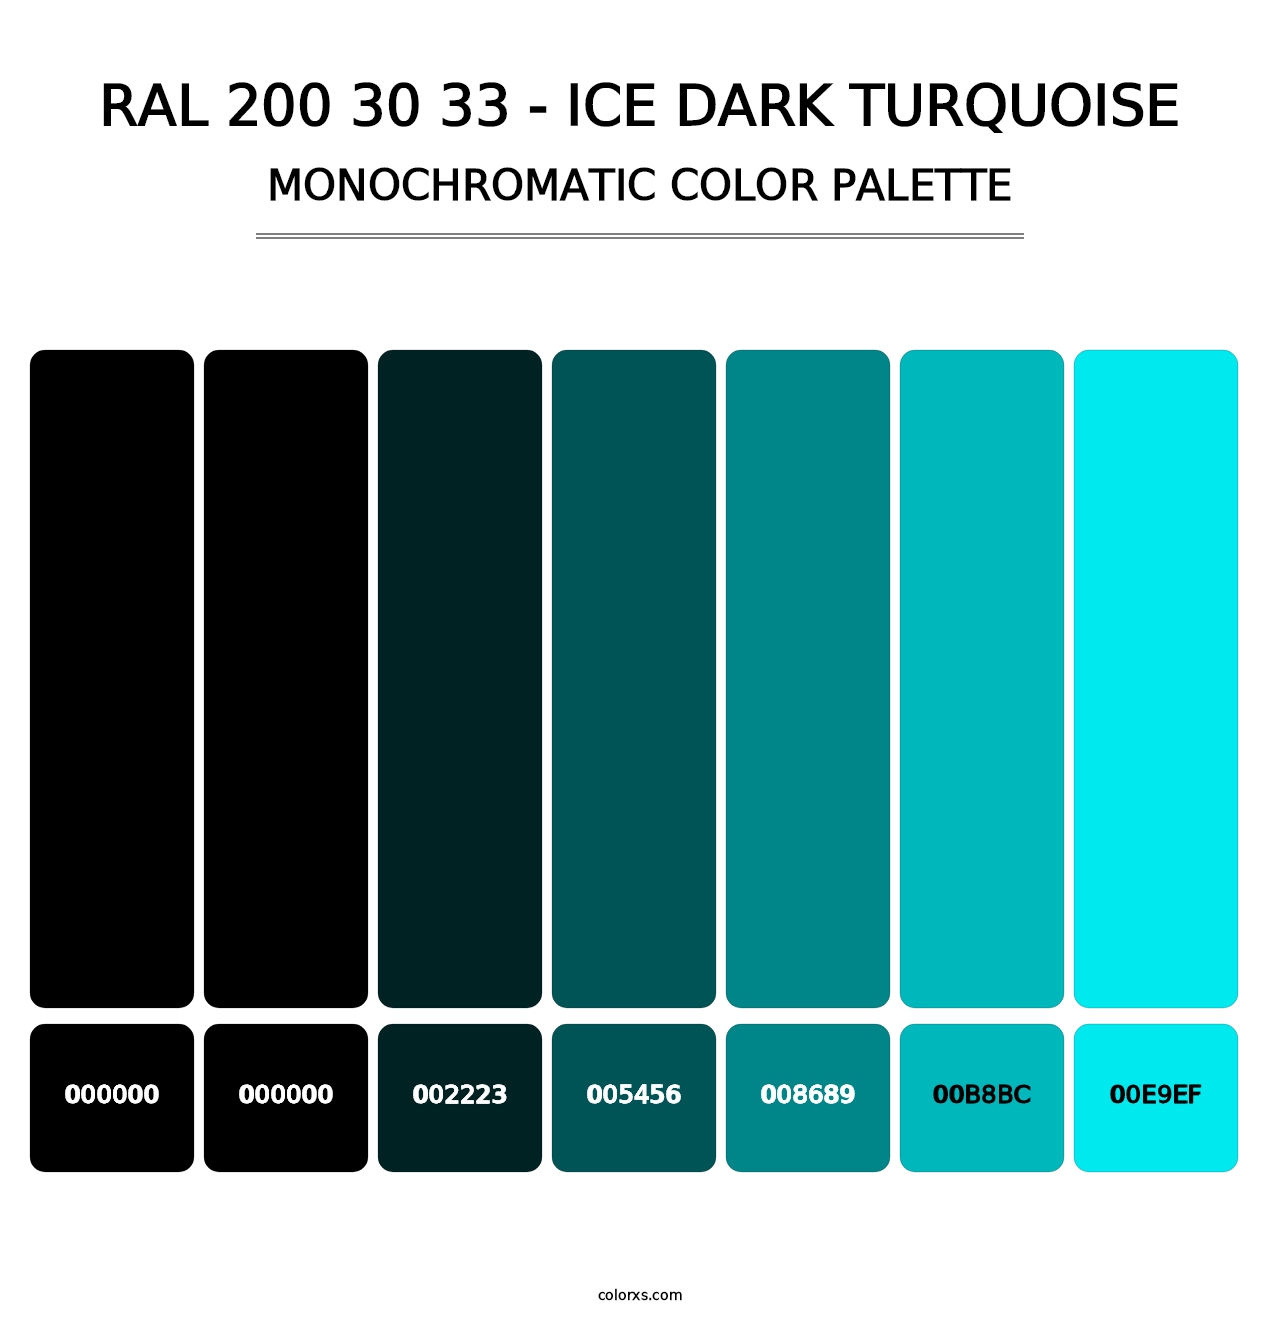 RAL 200 30 33 - Ice Dark Turquoise - Monochromatic Color Palette